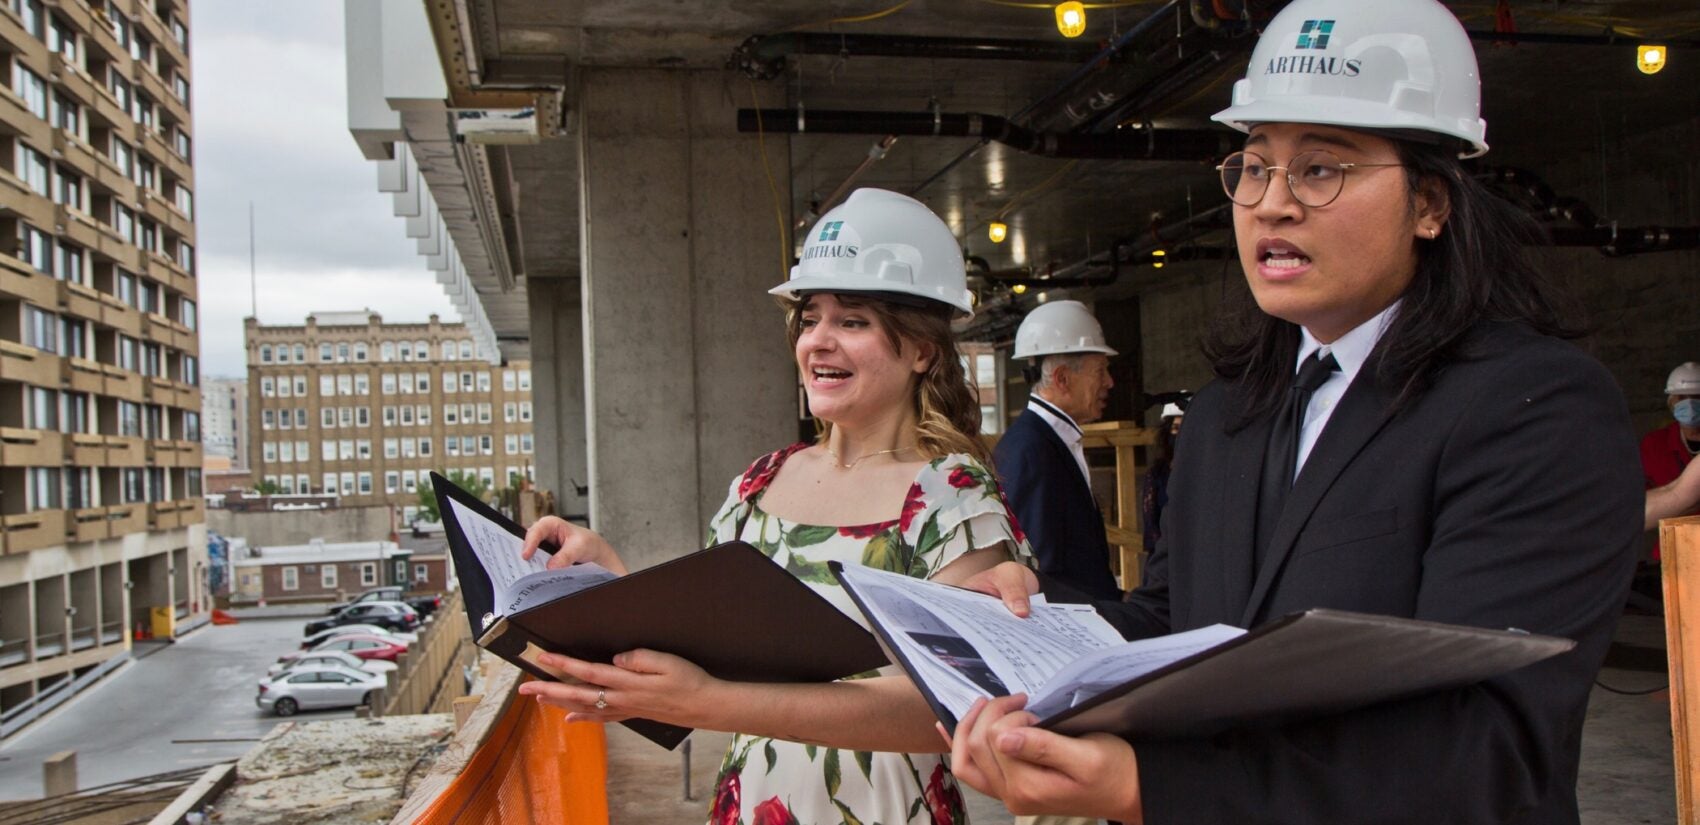 University of the Arts seniors Andrew Malabunga (right) and Miranda Pilato (left) rehearse on the 7th floor of the under-construction Arthaus Condominiums for their Opera on the Avenue performance on Sept. 16, 2020. (Kimberly Paynter/WHYY)